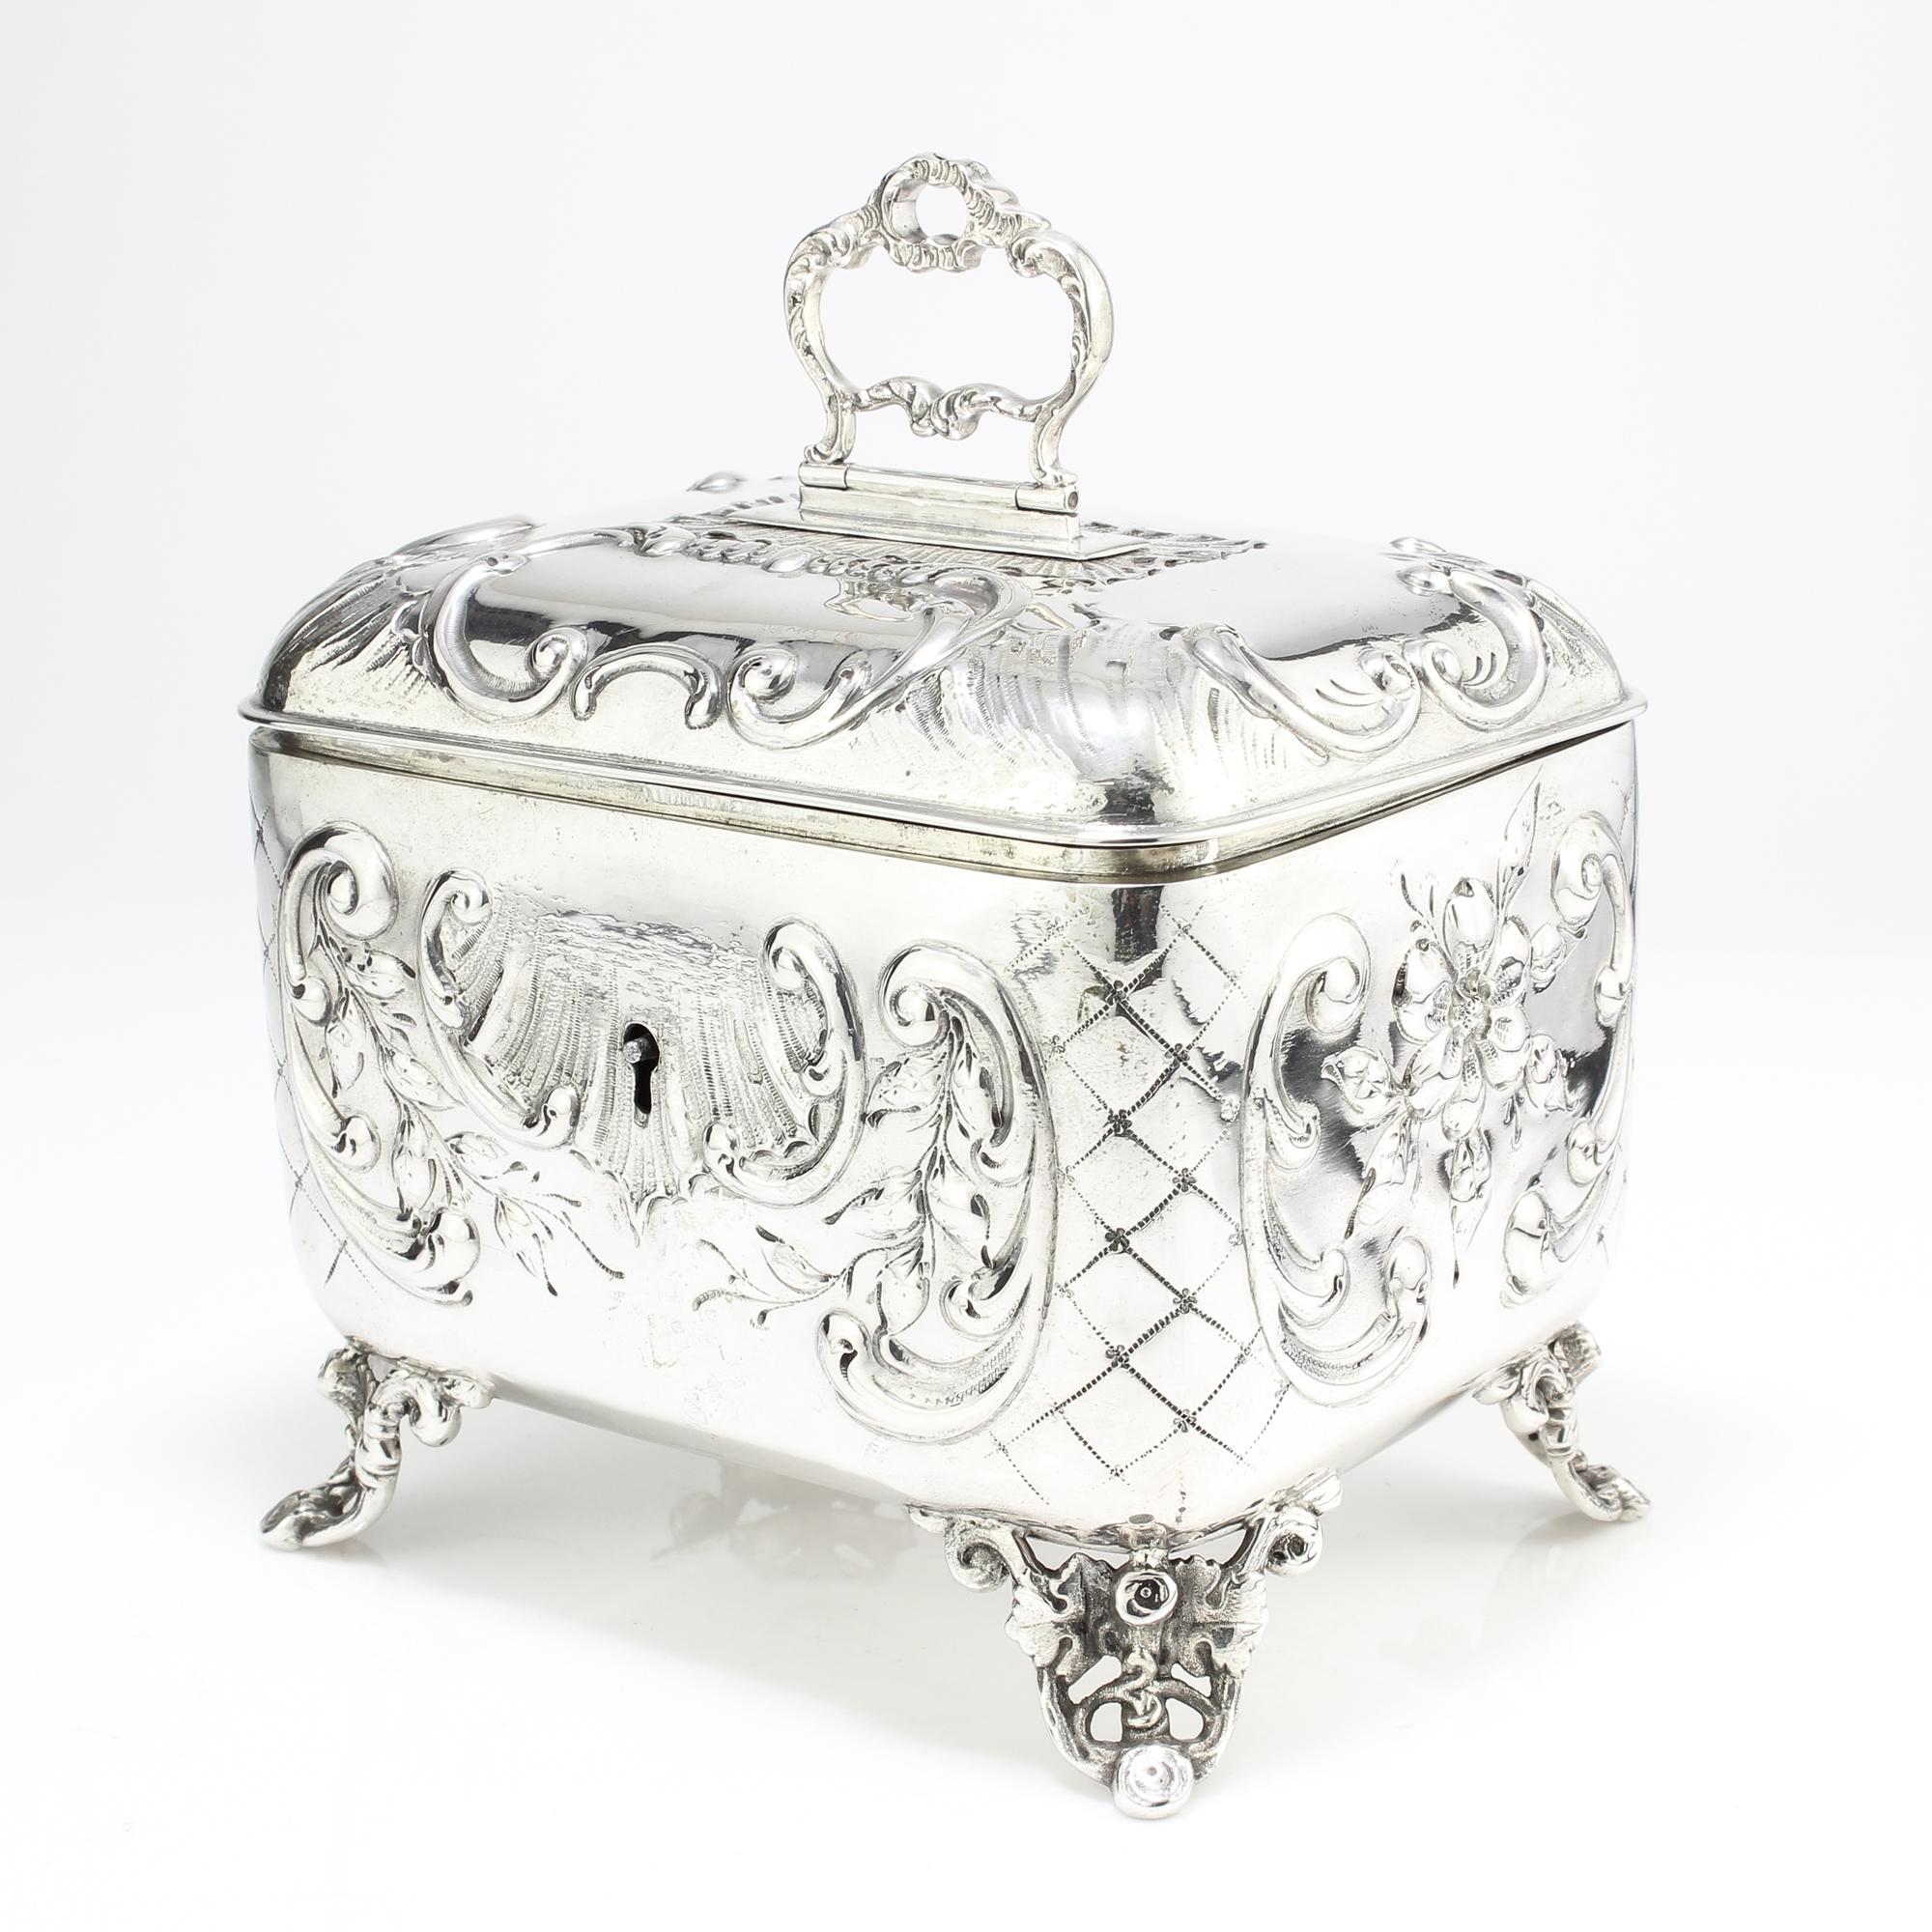 Antique Austrian Silver Tea Caddy, Made in Circa 1867 In Good Condition For Sale In Braintree, GB